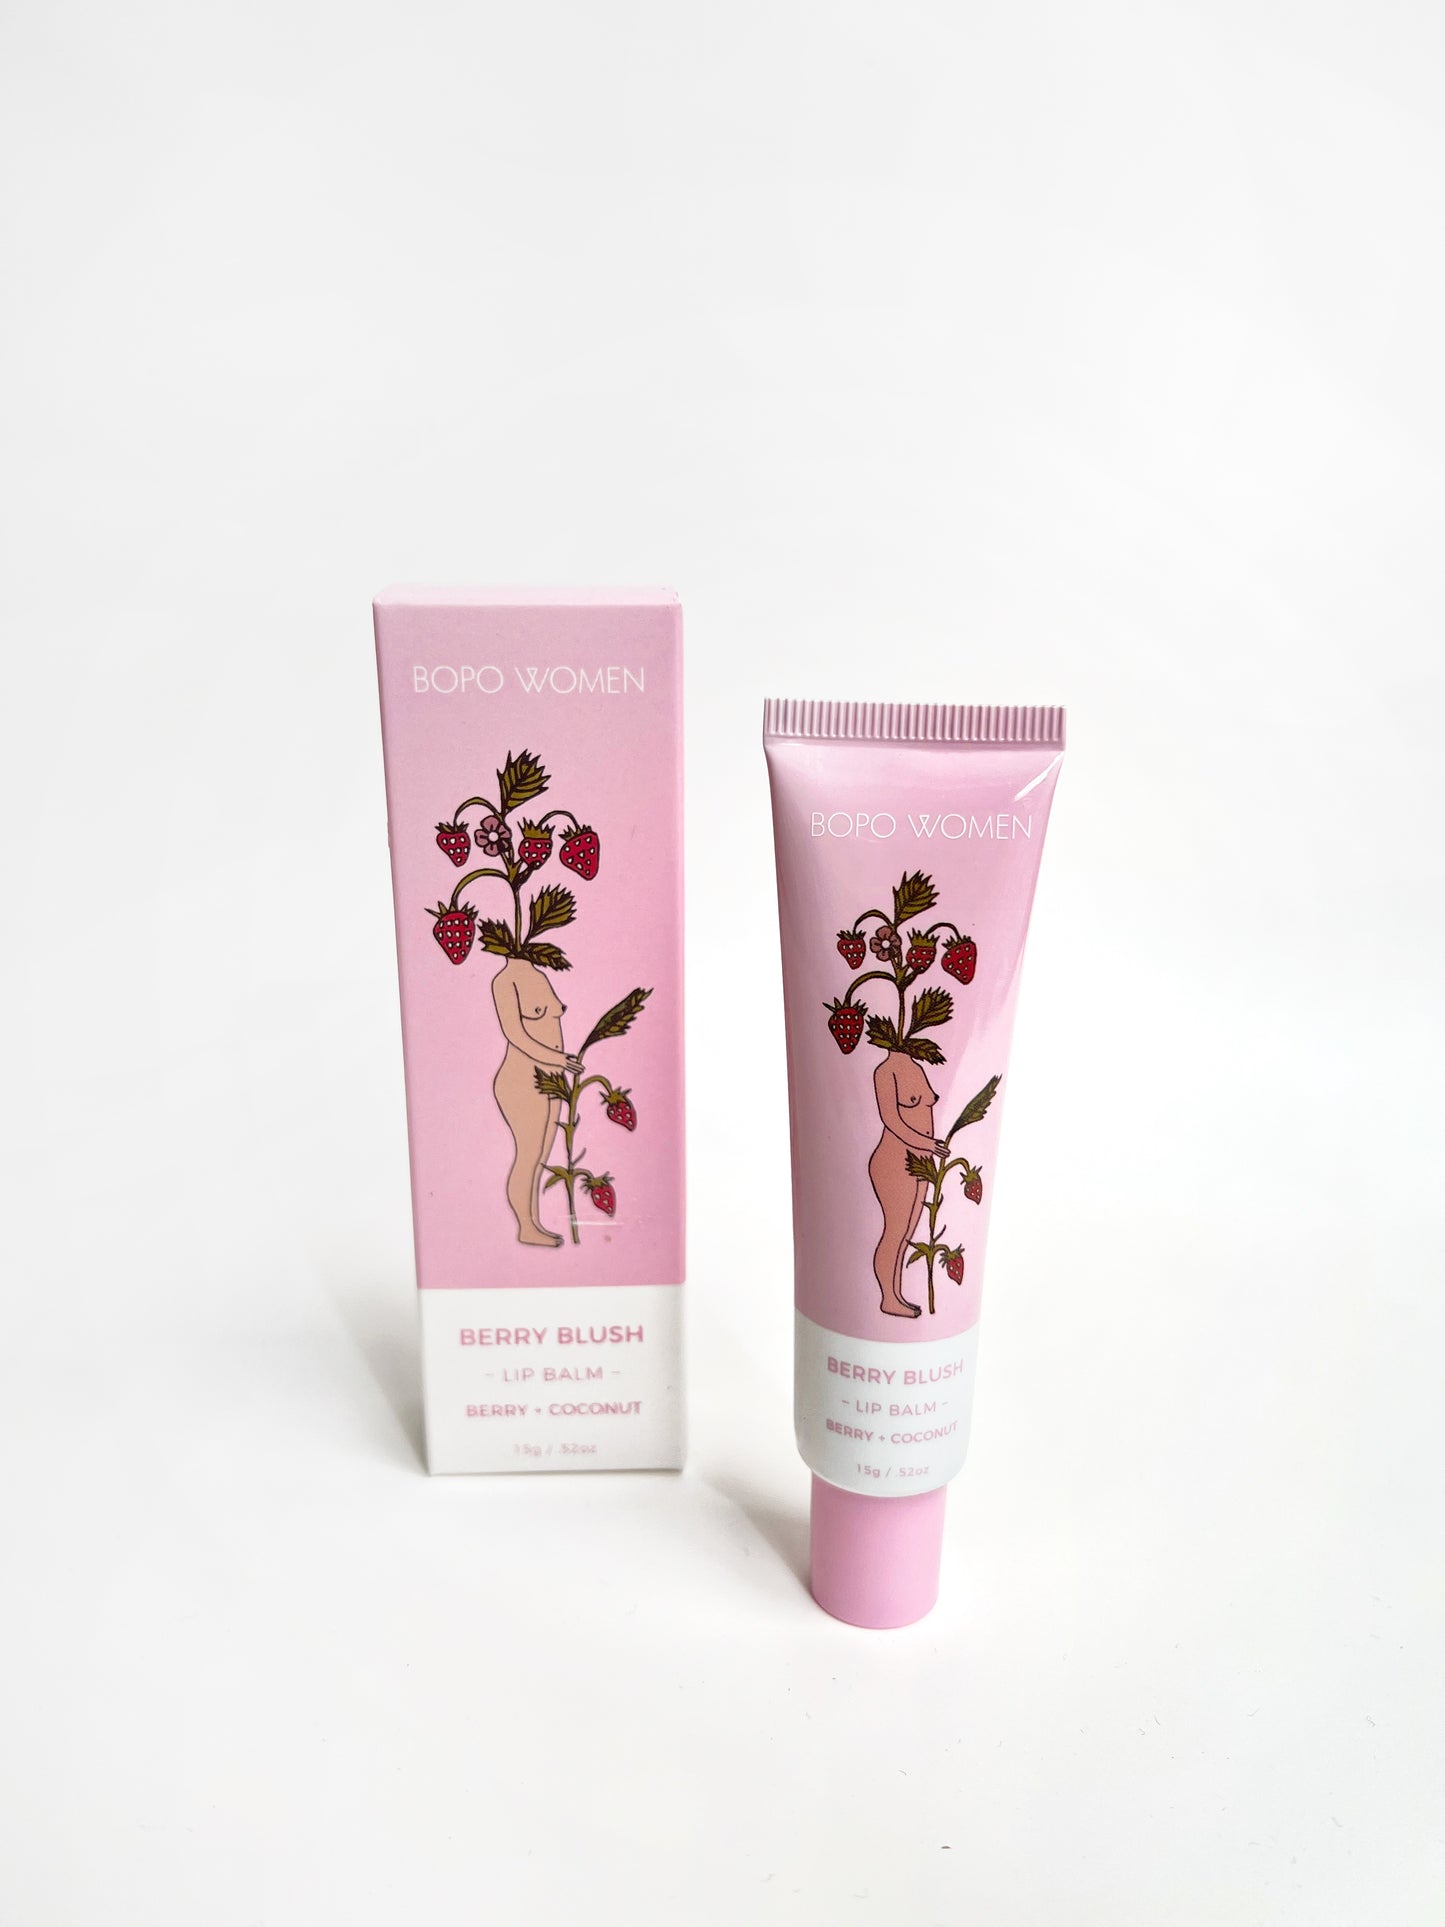 Berry Blush by Bopo Women. A strawberry and coconut flavoured lip balm with a clear glossy finish. In pink and white packaging.